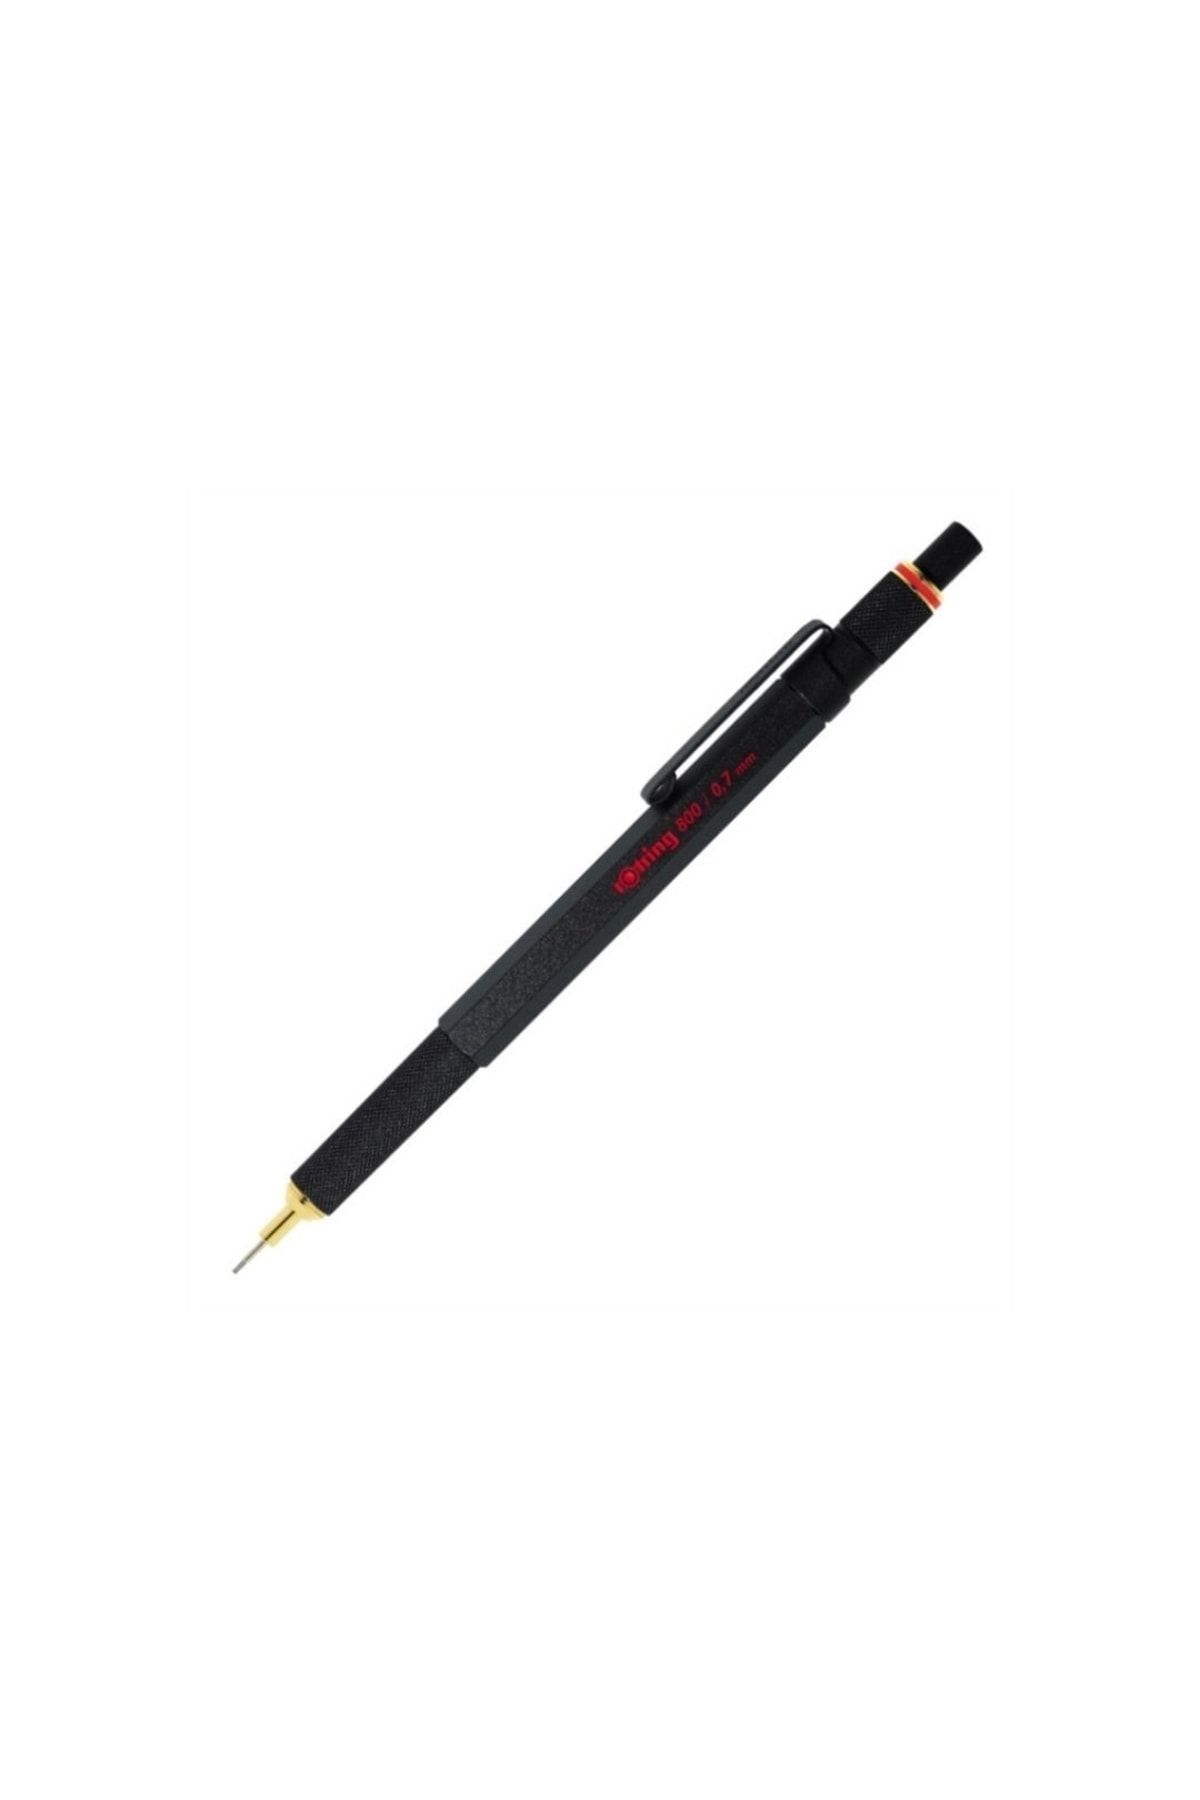 Amazon.com: rOtring Rapidograph 0.1mm Technical Drawing Pen (S0203000) :  Everything Else